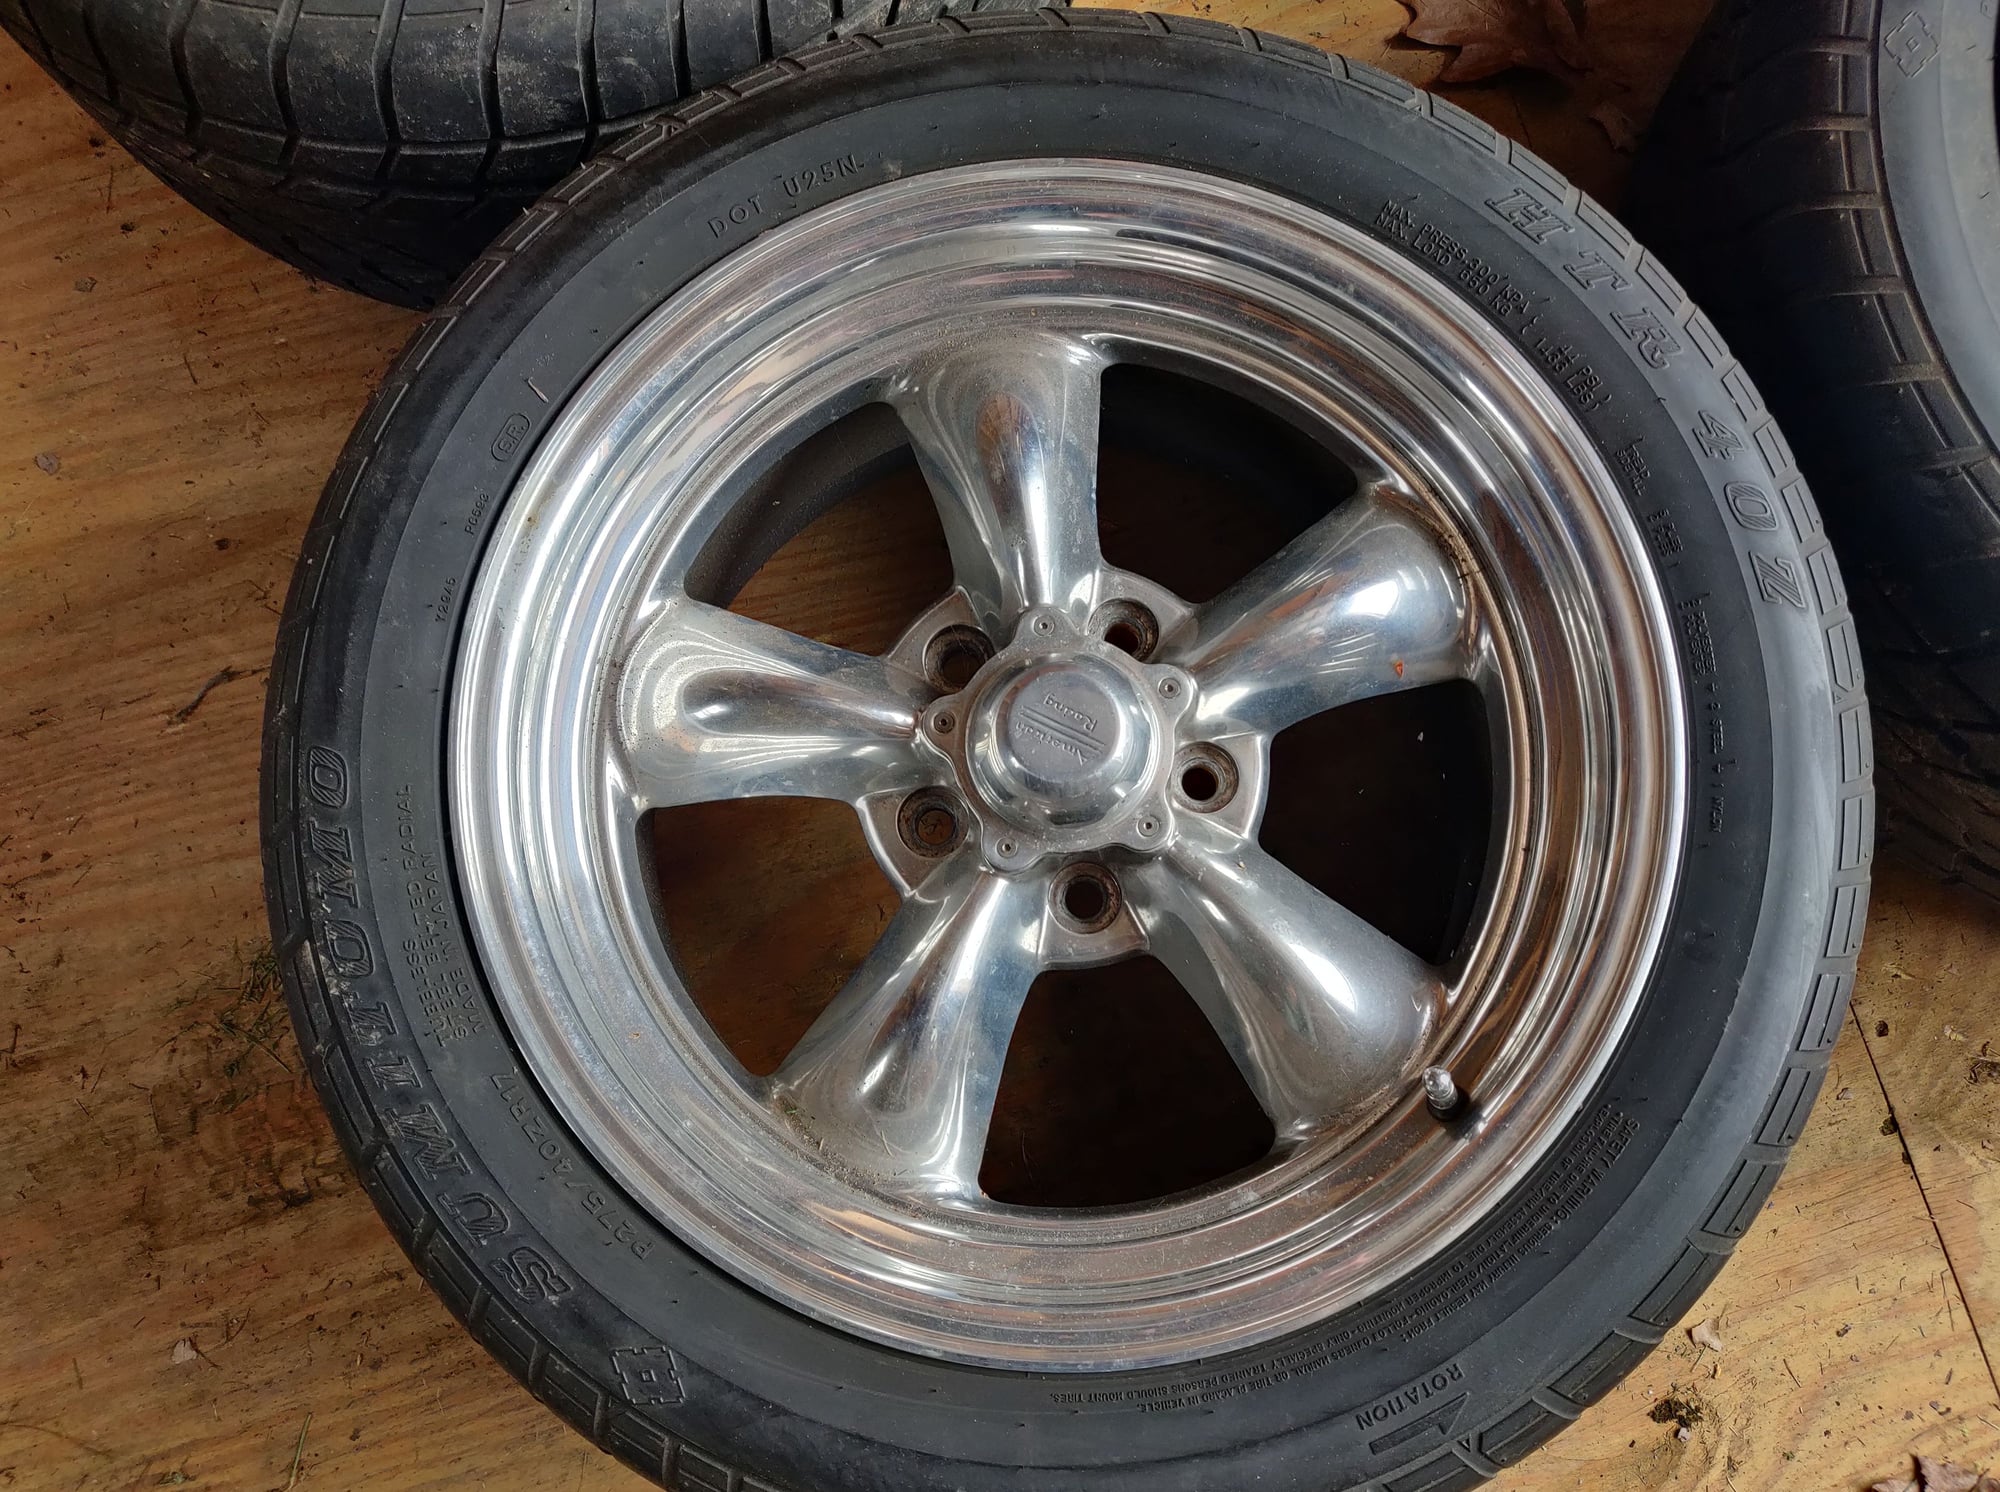 Wheels and Tires/Axles - (5) 17x9.5 Torque Thrust II wheels, (4) with tires, all lug nuts and caps incl - Used - 0  All Models - Downingtown, PA 19335, United States